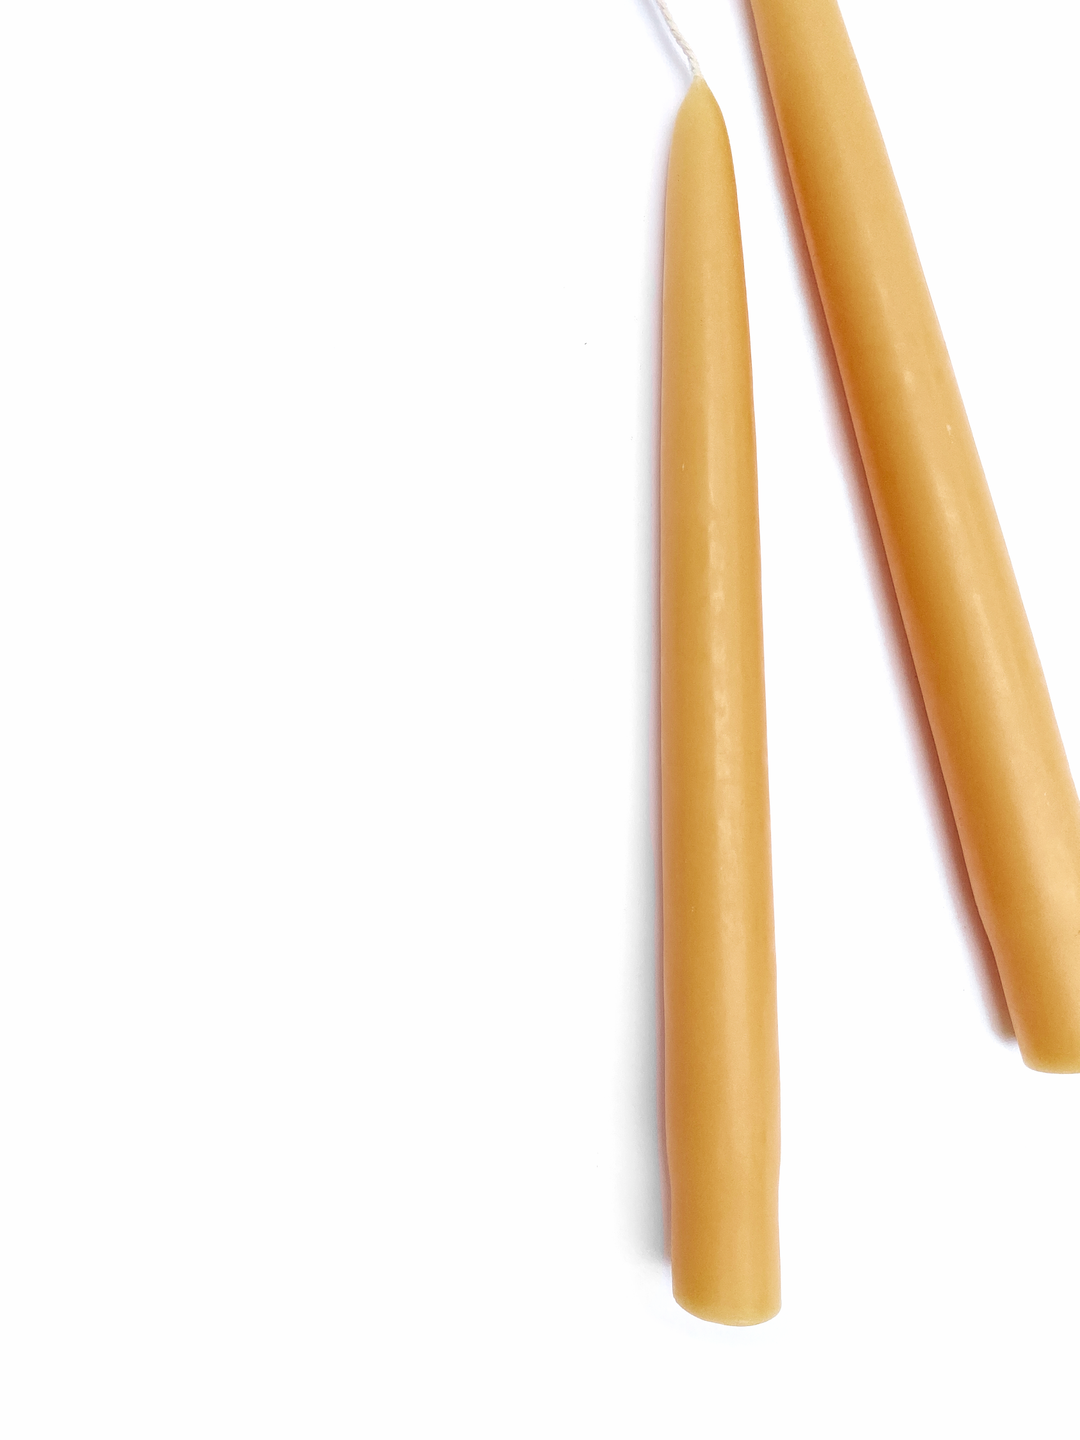 Dripless Taper Candles in Maize | 9" (Pair)